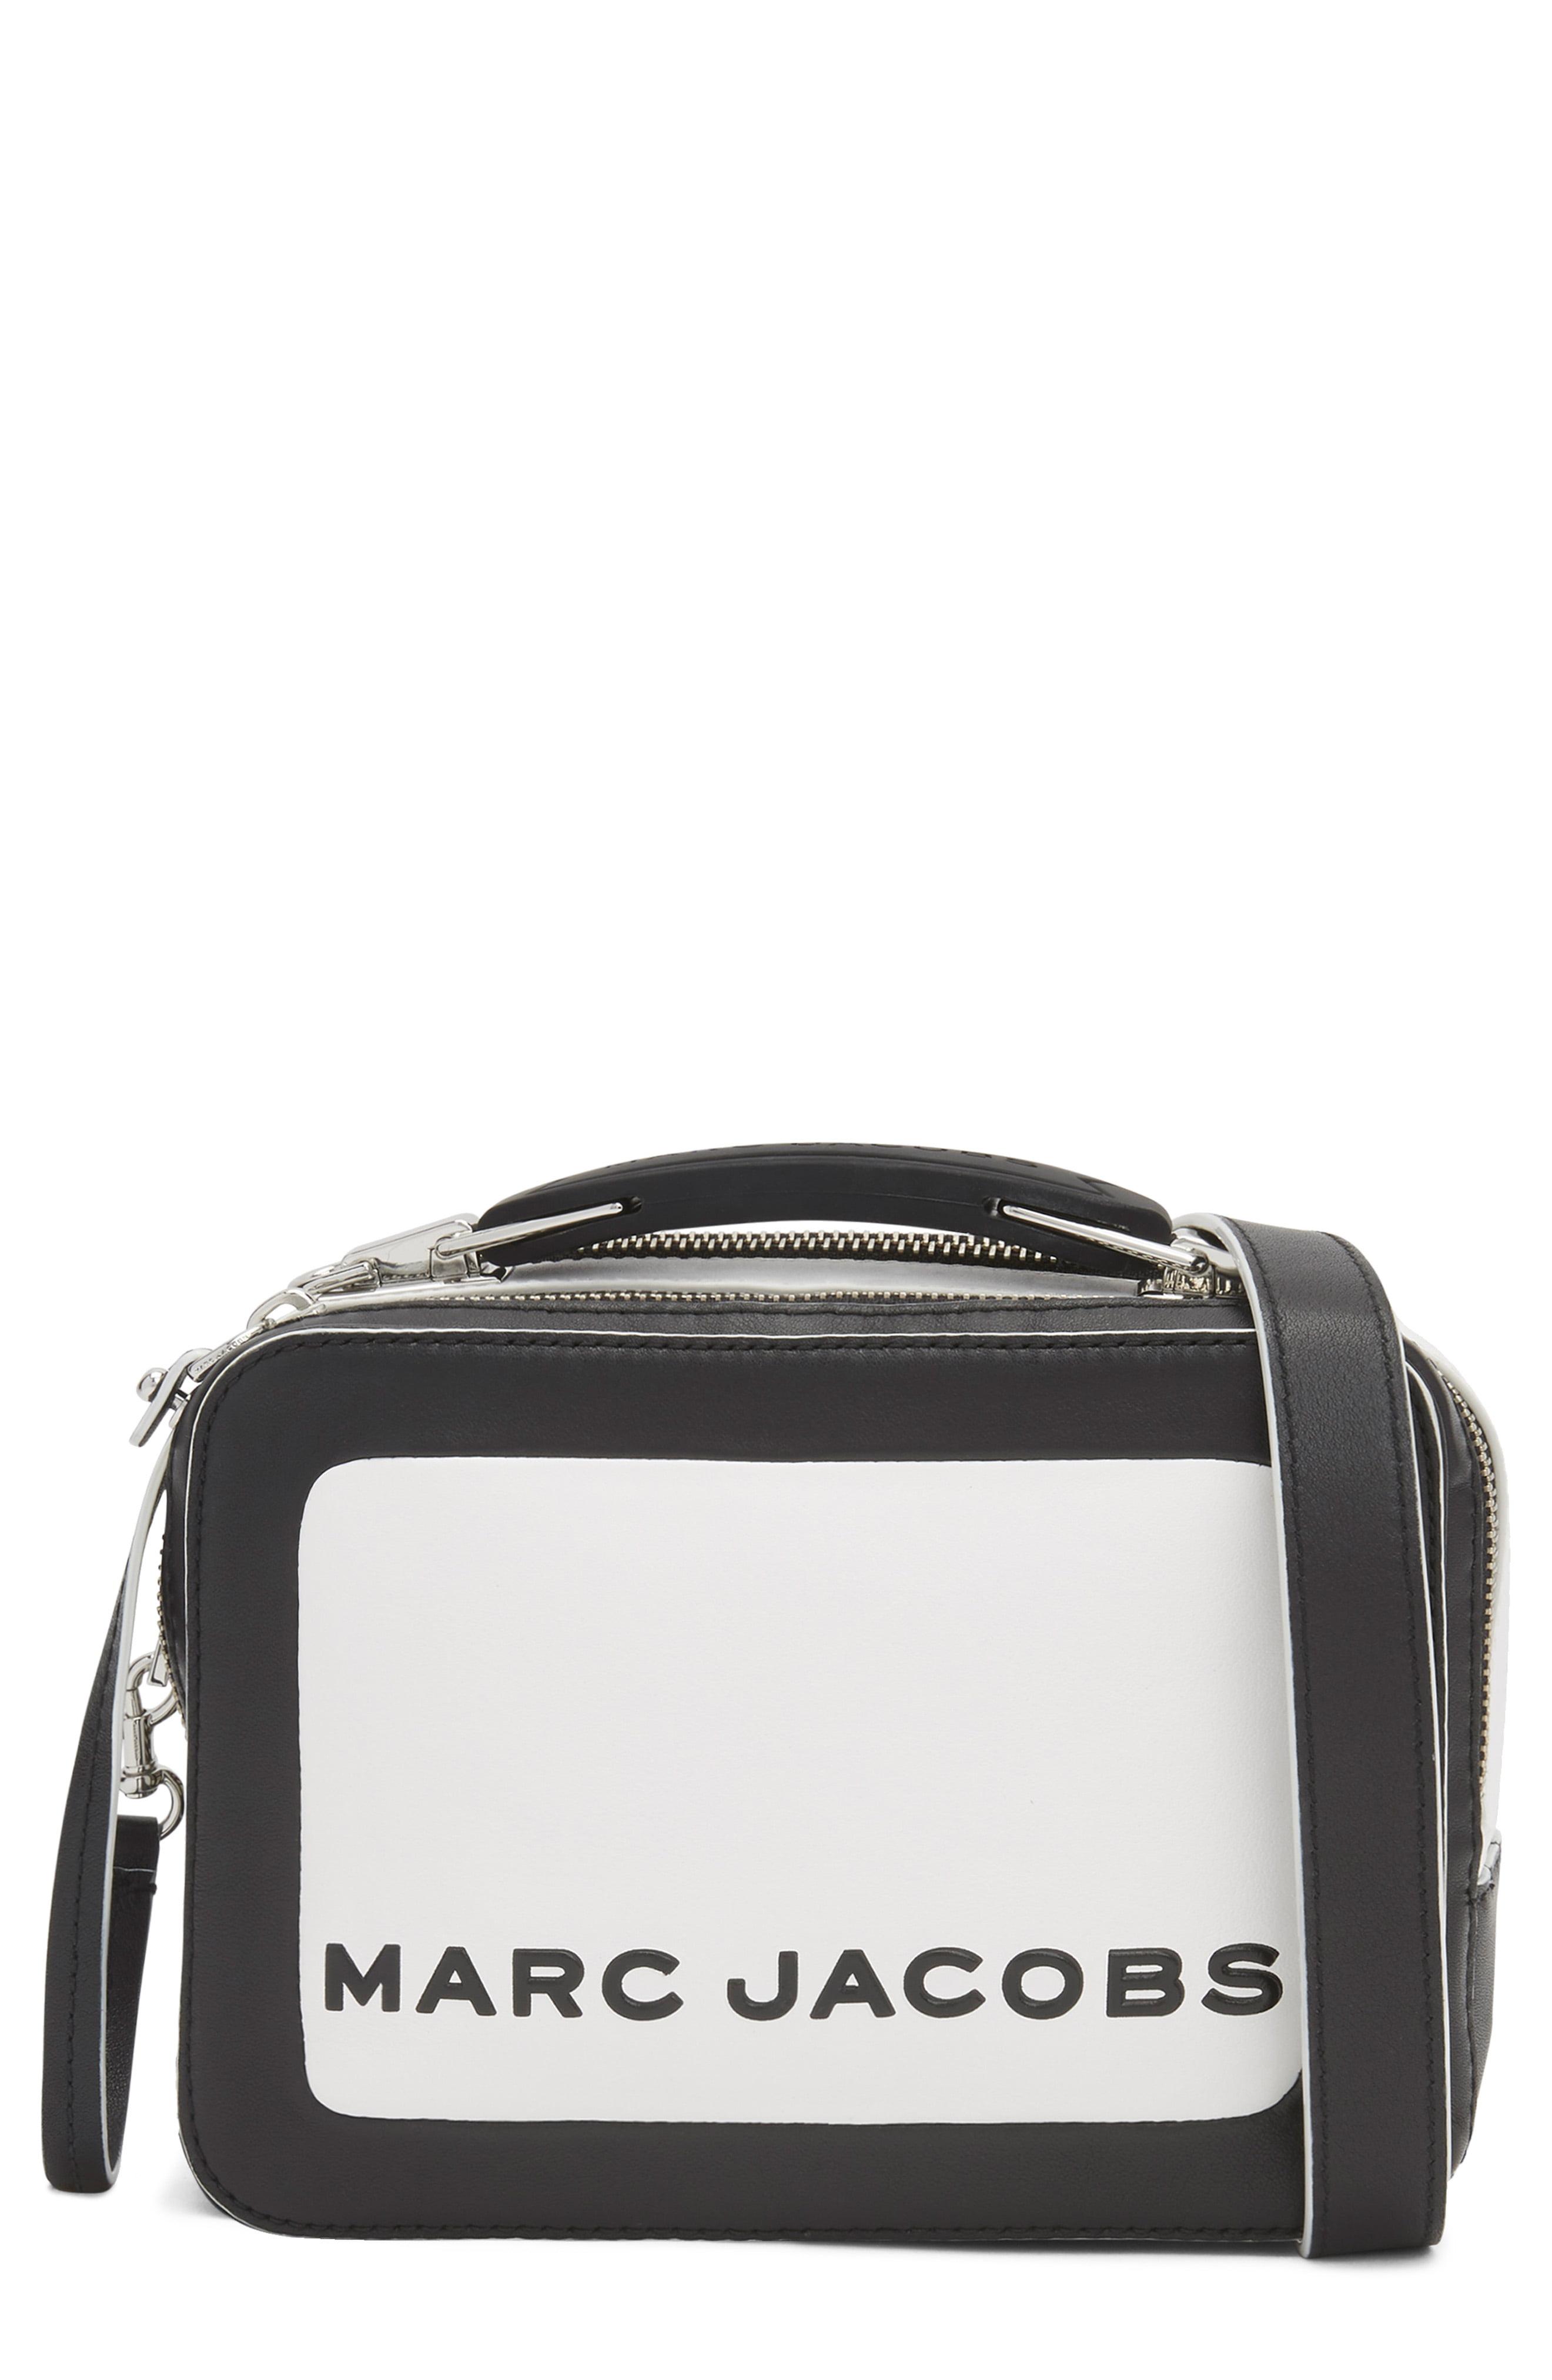 Lyst - Marc Jacobs The Box 20 Colorblock Leather Handbag in Black